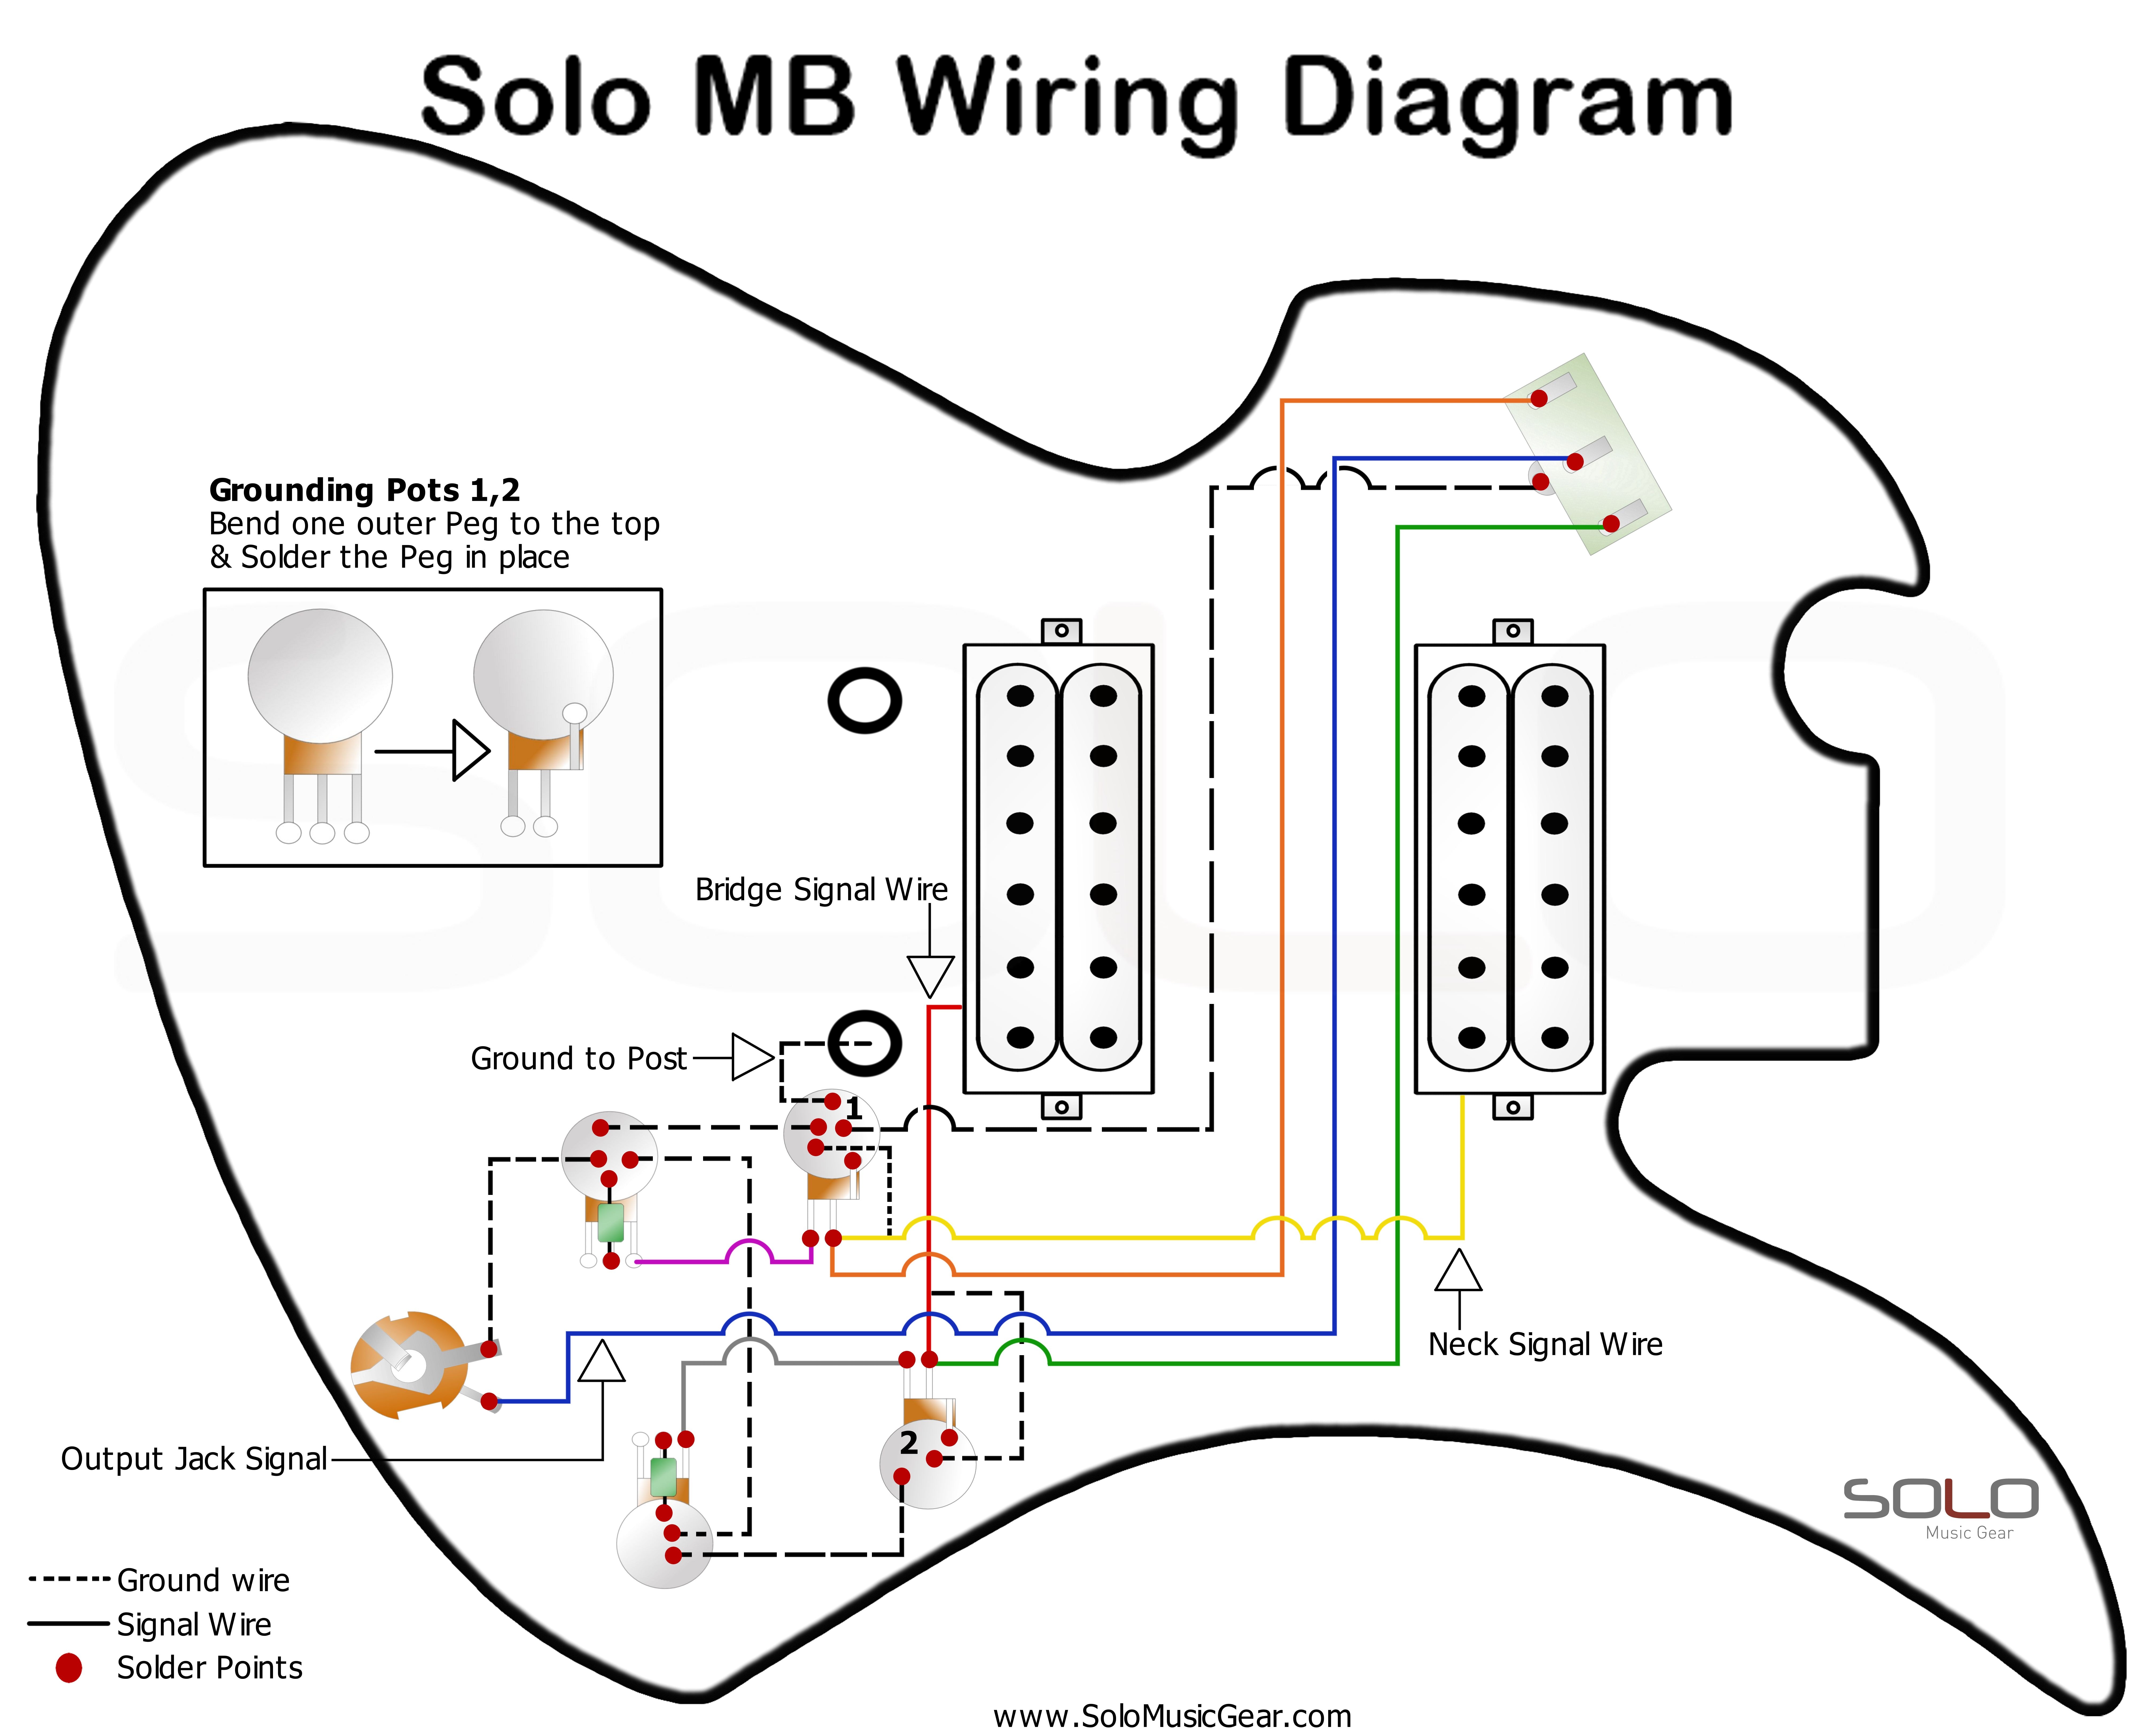 SOLO MB Style Wiring Guide